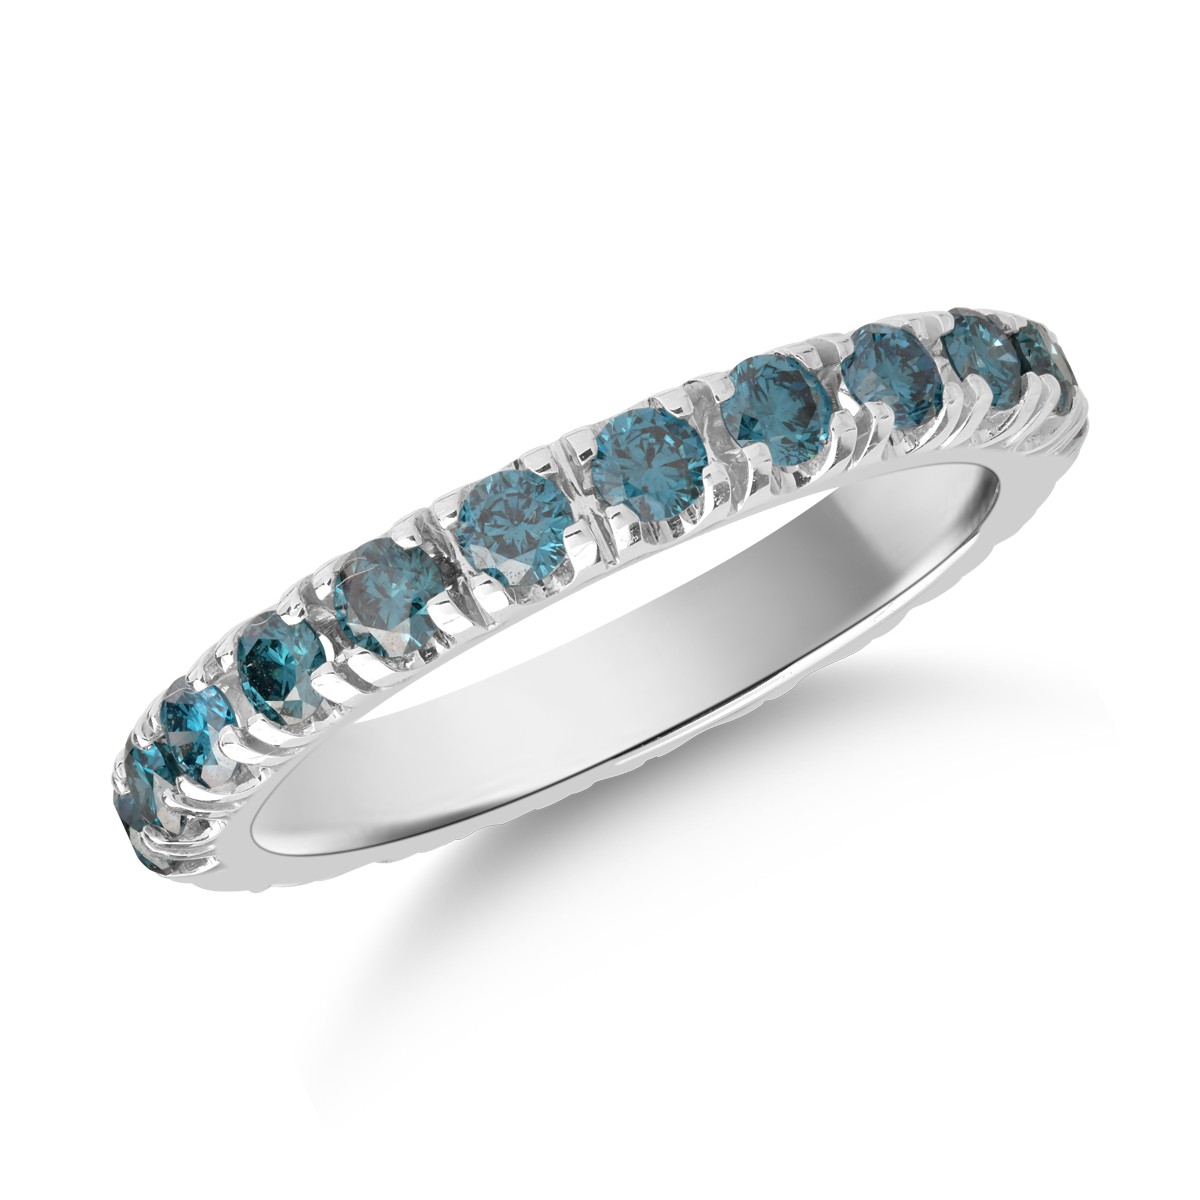 18K white gold infinity ring with 1.15ct blue diamonds